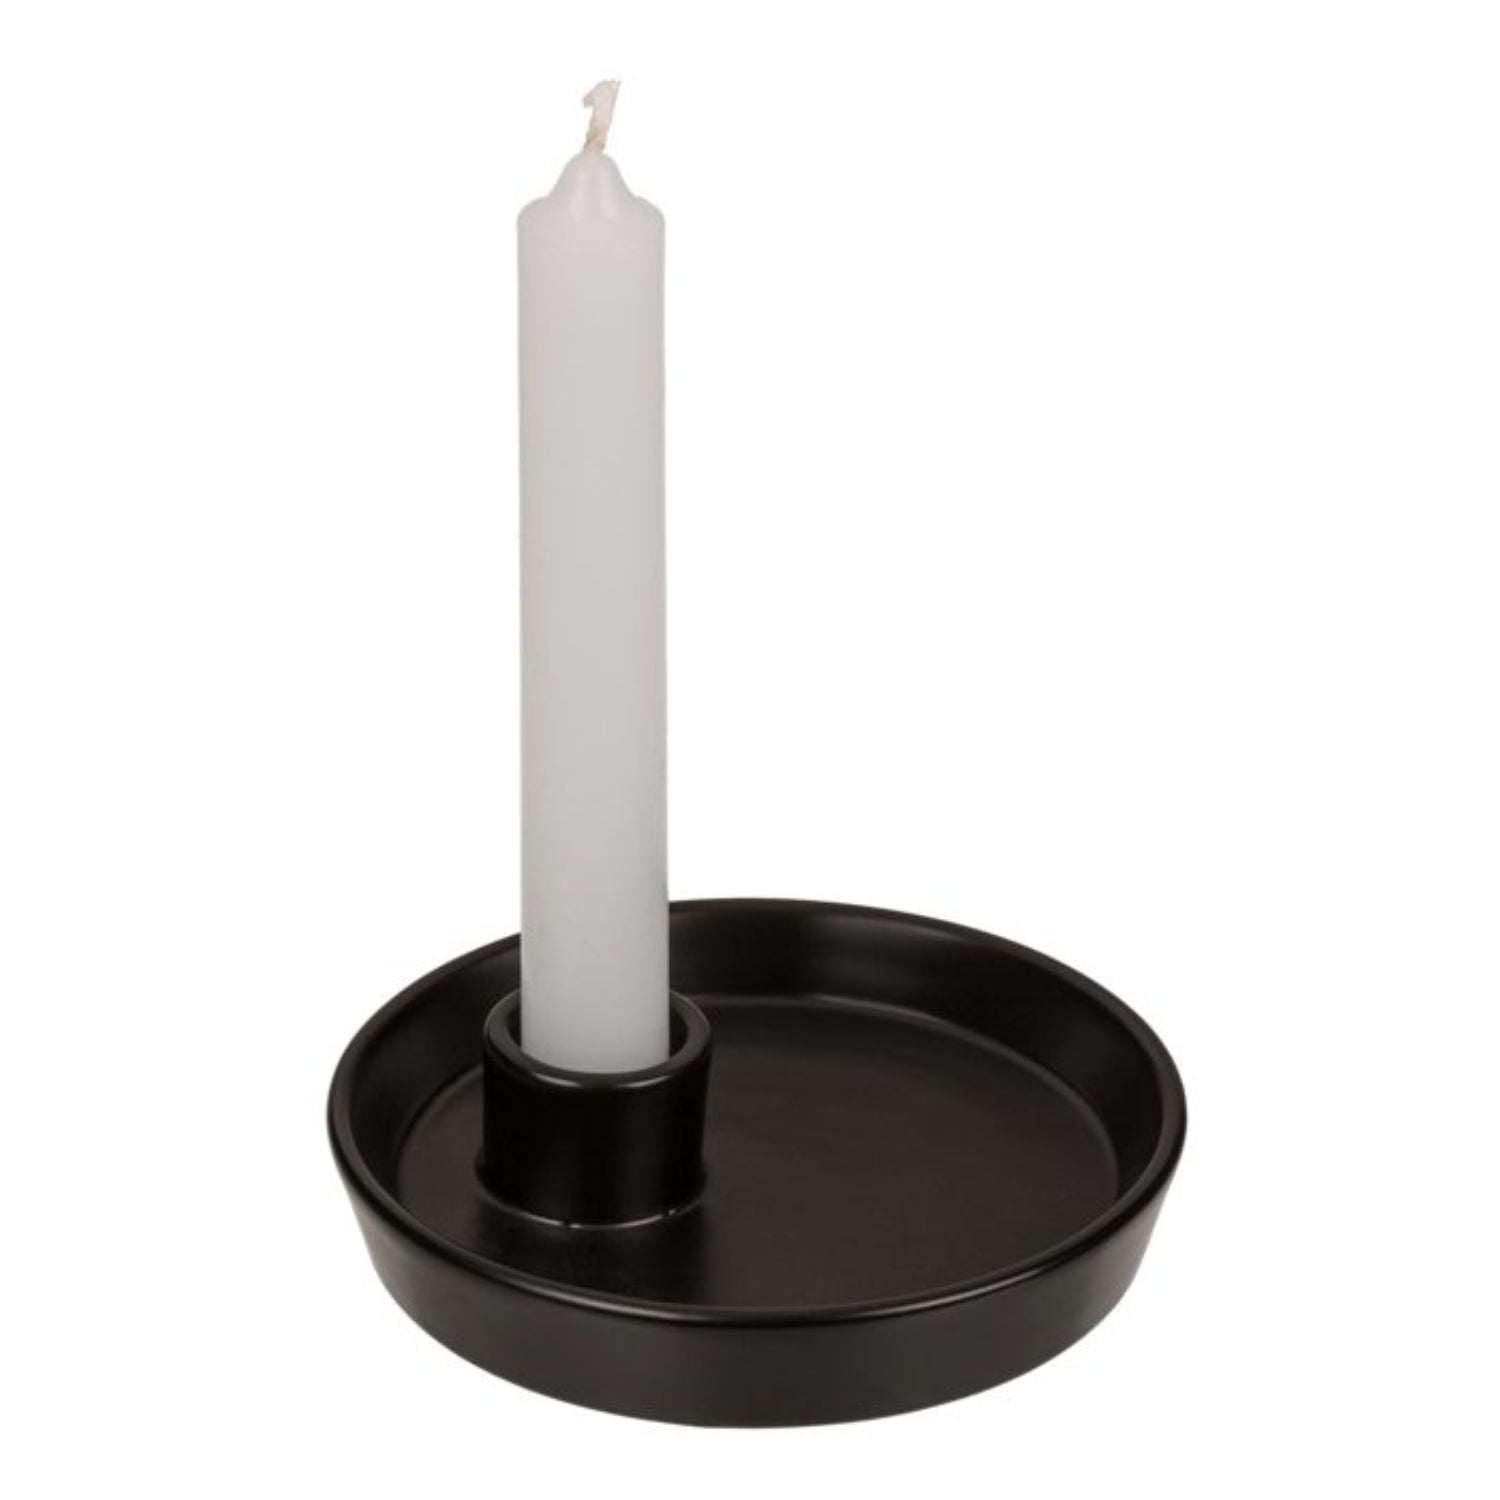 Ceramic Candle Holder Candlestick Nordic Style Simple Home Decorative Ornament